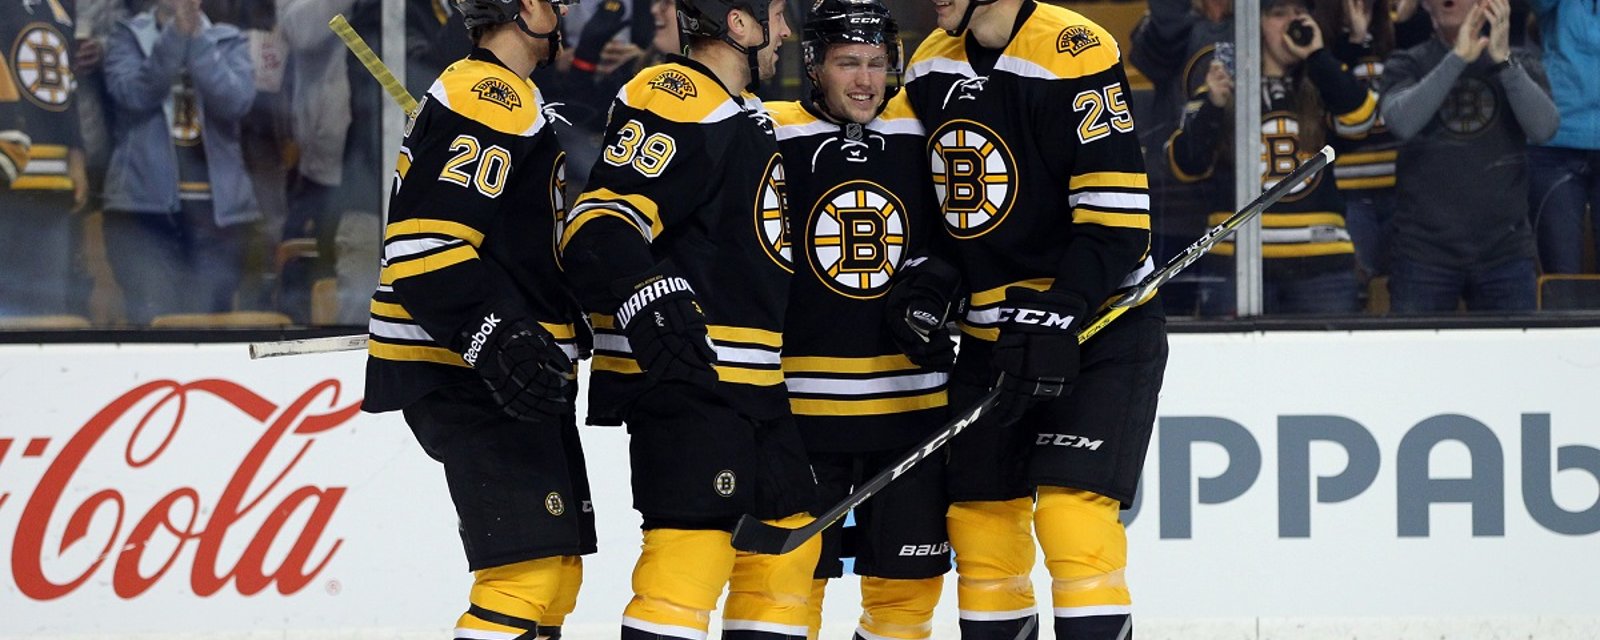 Bruins insider believes management “should be fired on the spot” if they make this trade.